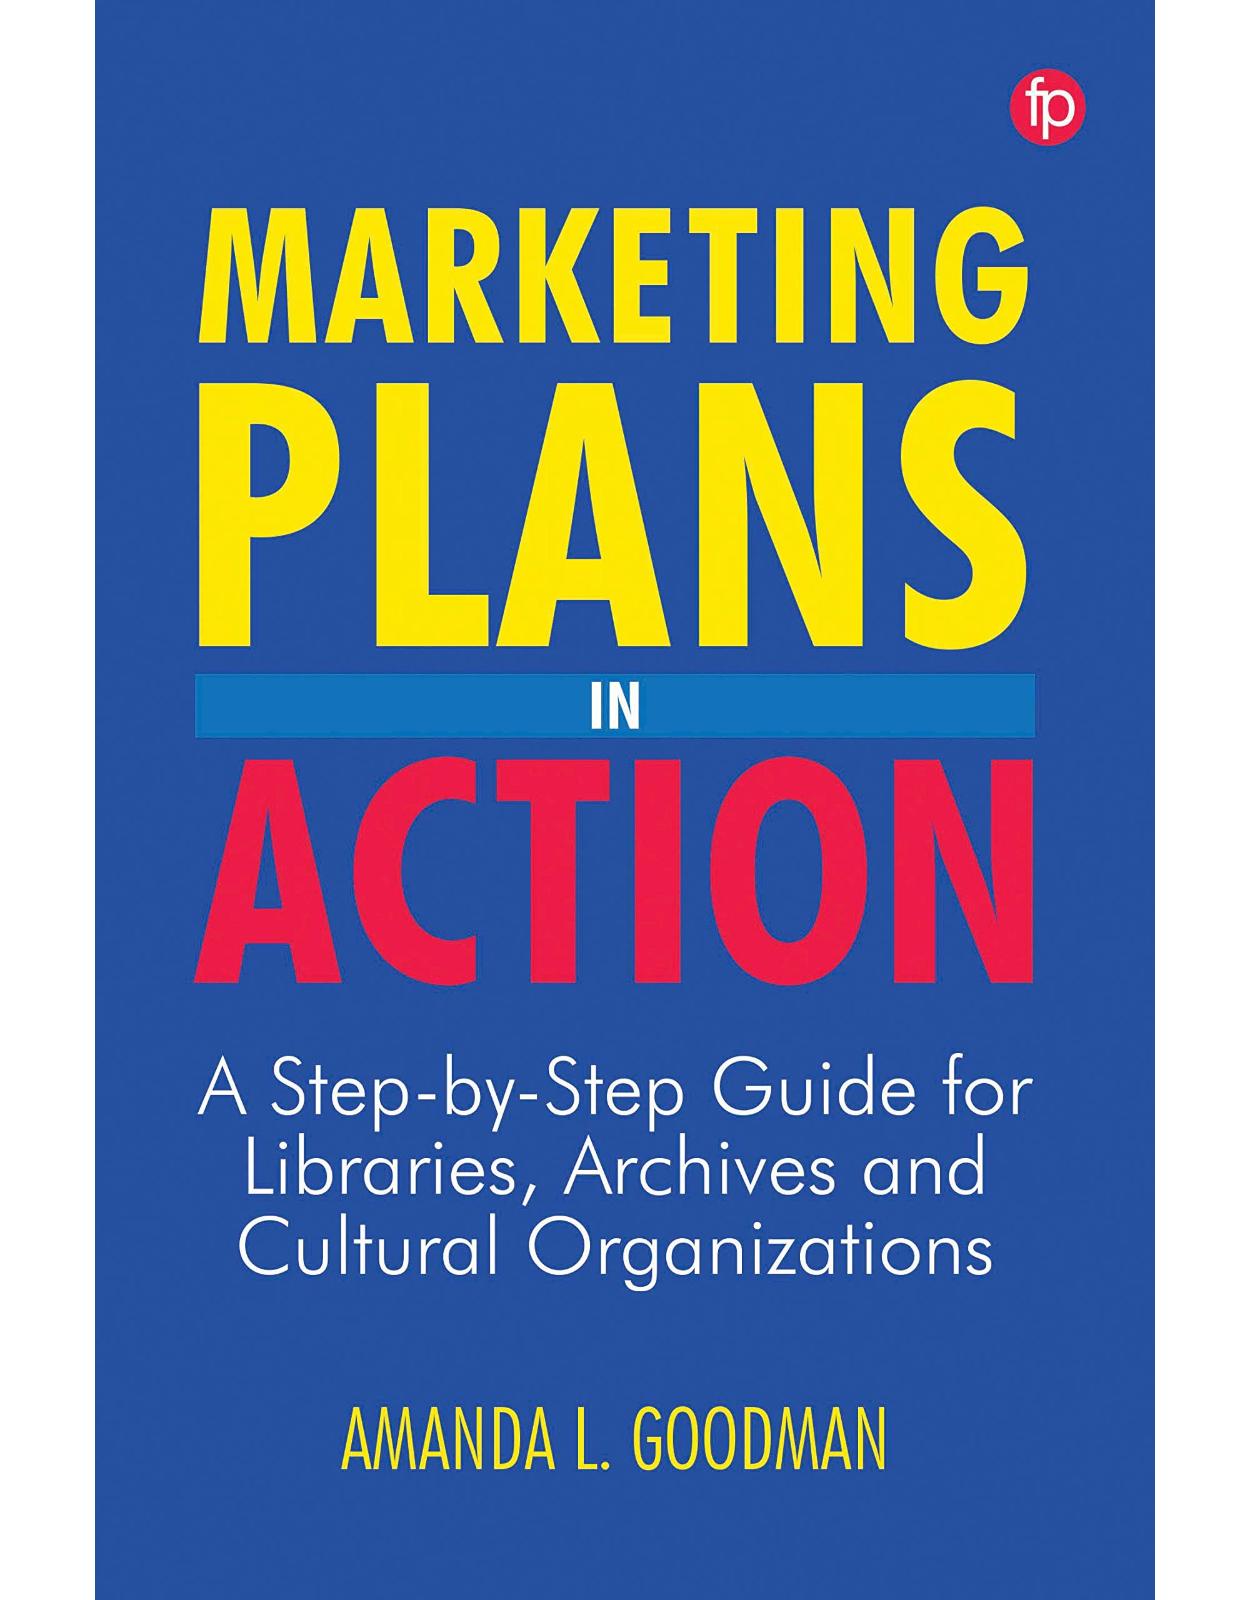 Marketing Plans in Action. A step-by-step guide for libraries, archives and cultural organizations